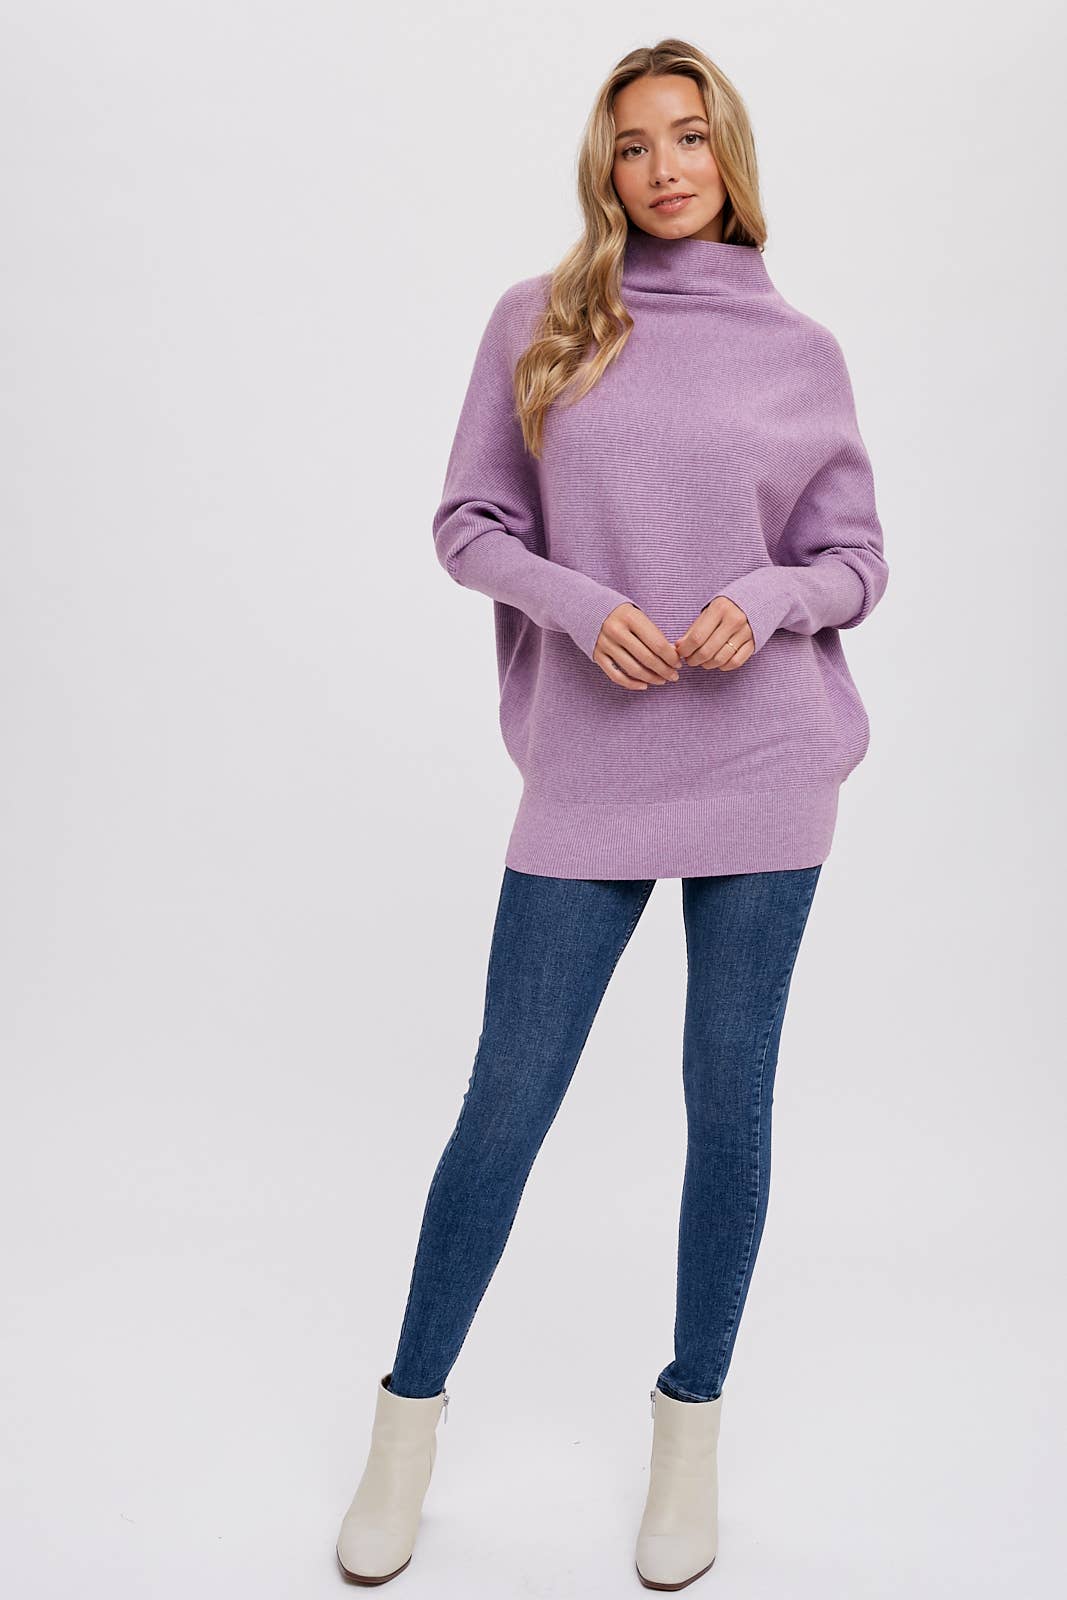 SLOUCH NECK DOLMAN PULLOVER: M/L / CHOCOLATE